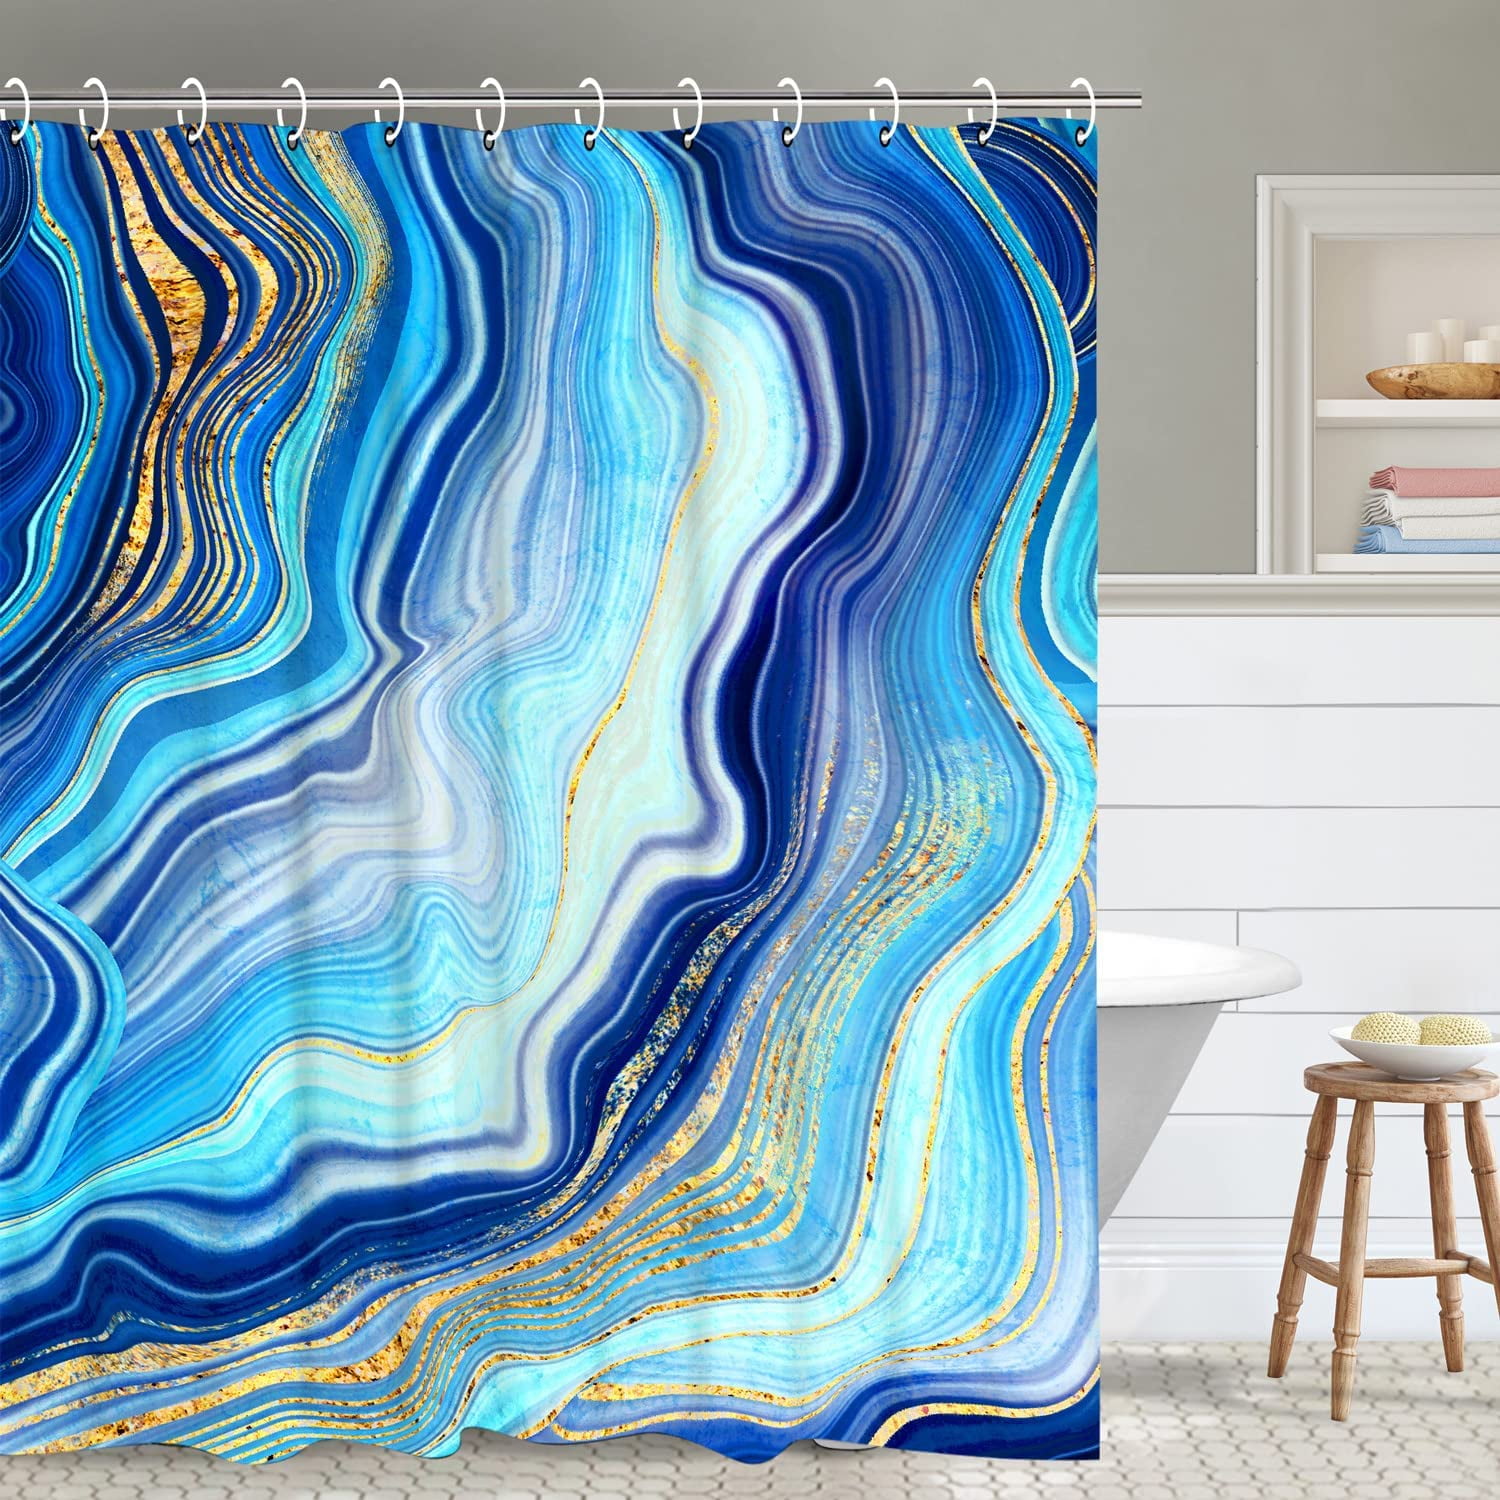 Details about   Colorful Shower Curtain Vintage Abstract Shape Print for Bathroom 